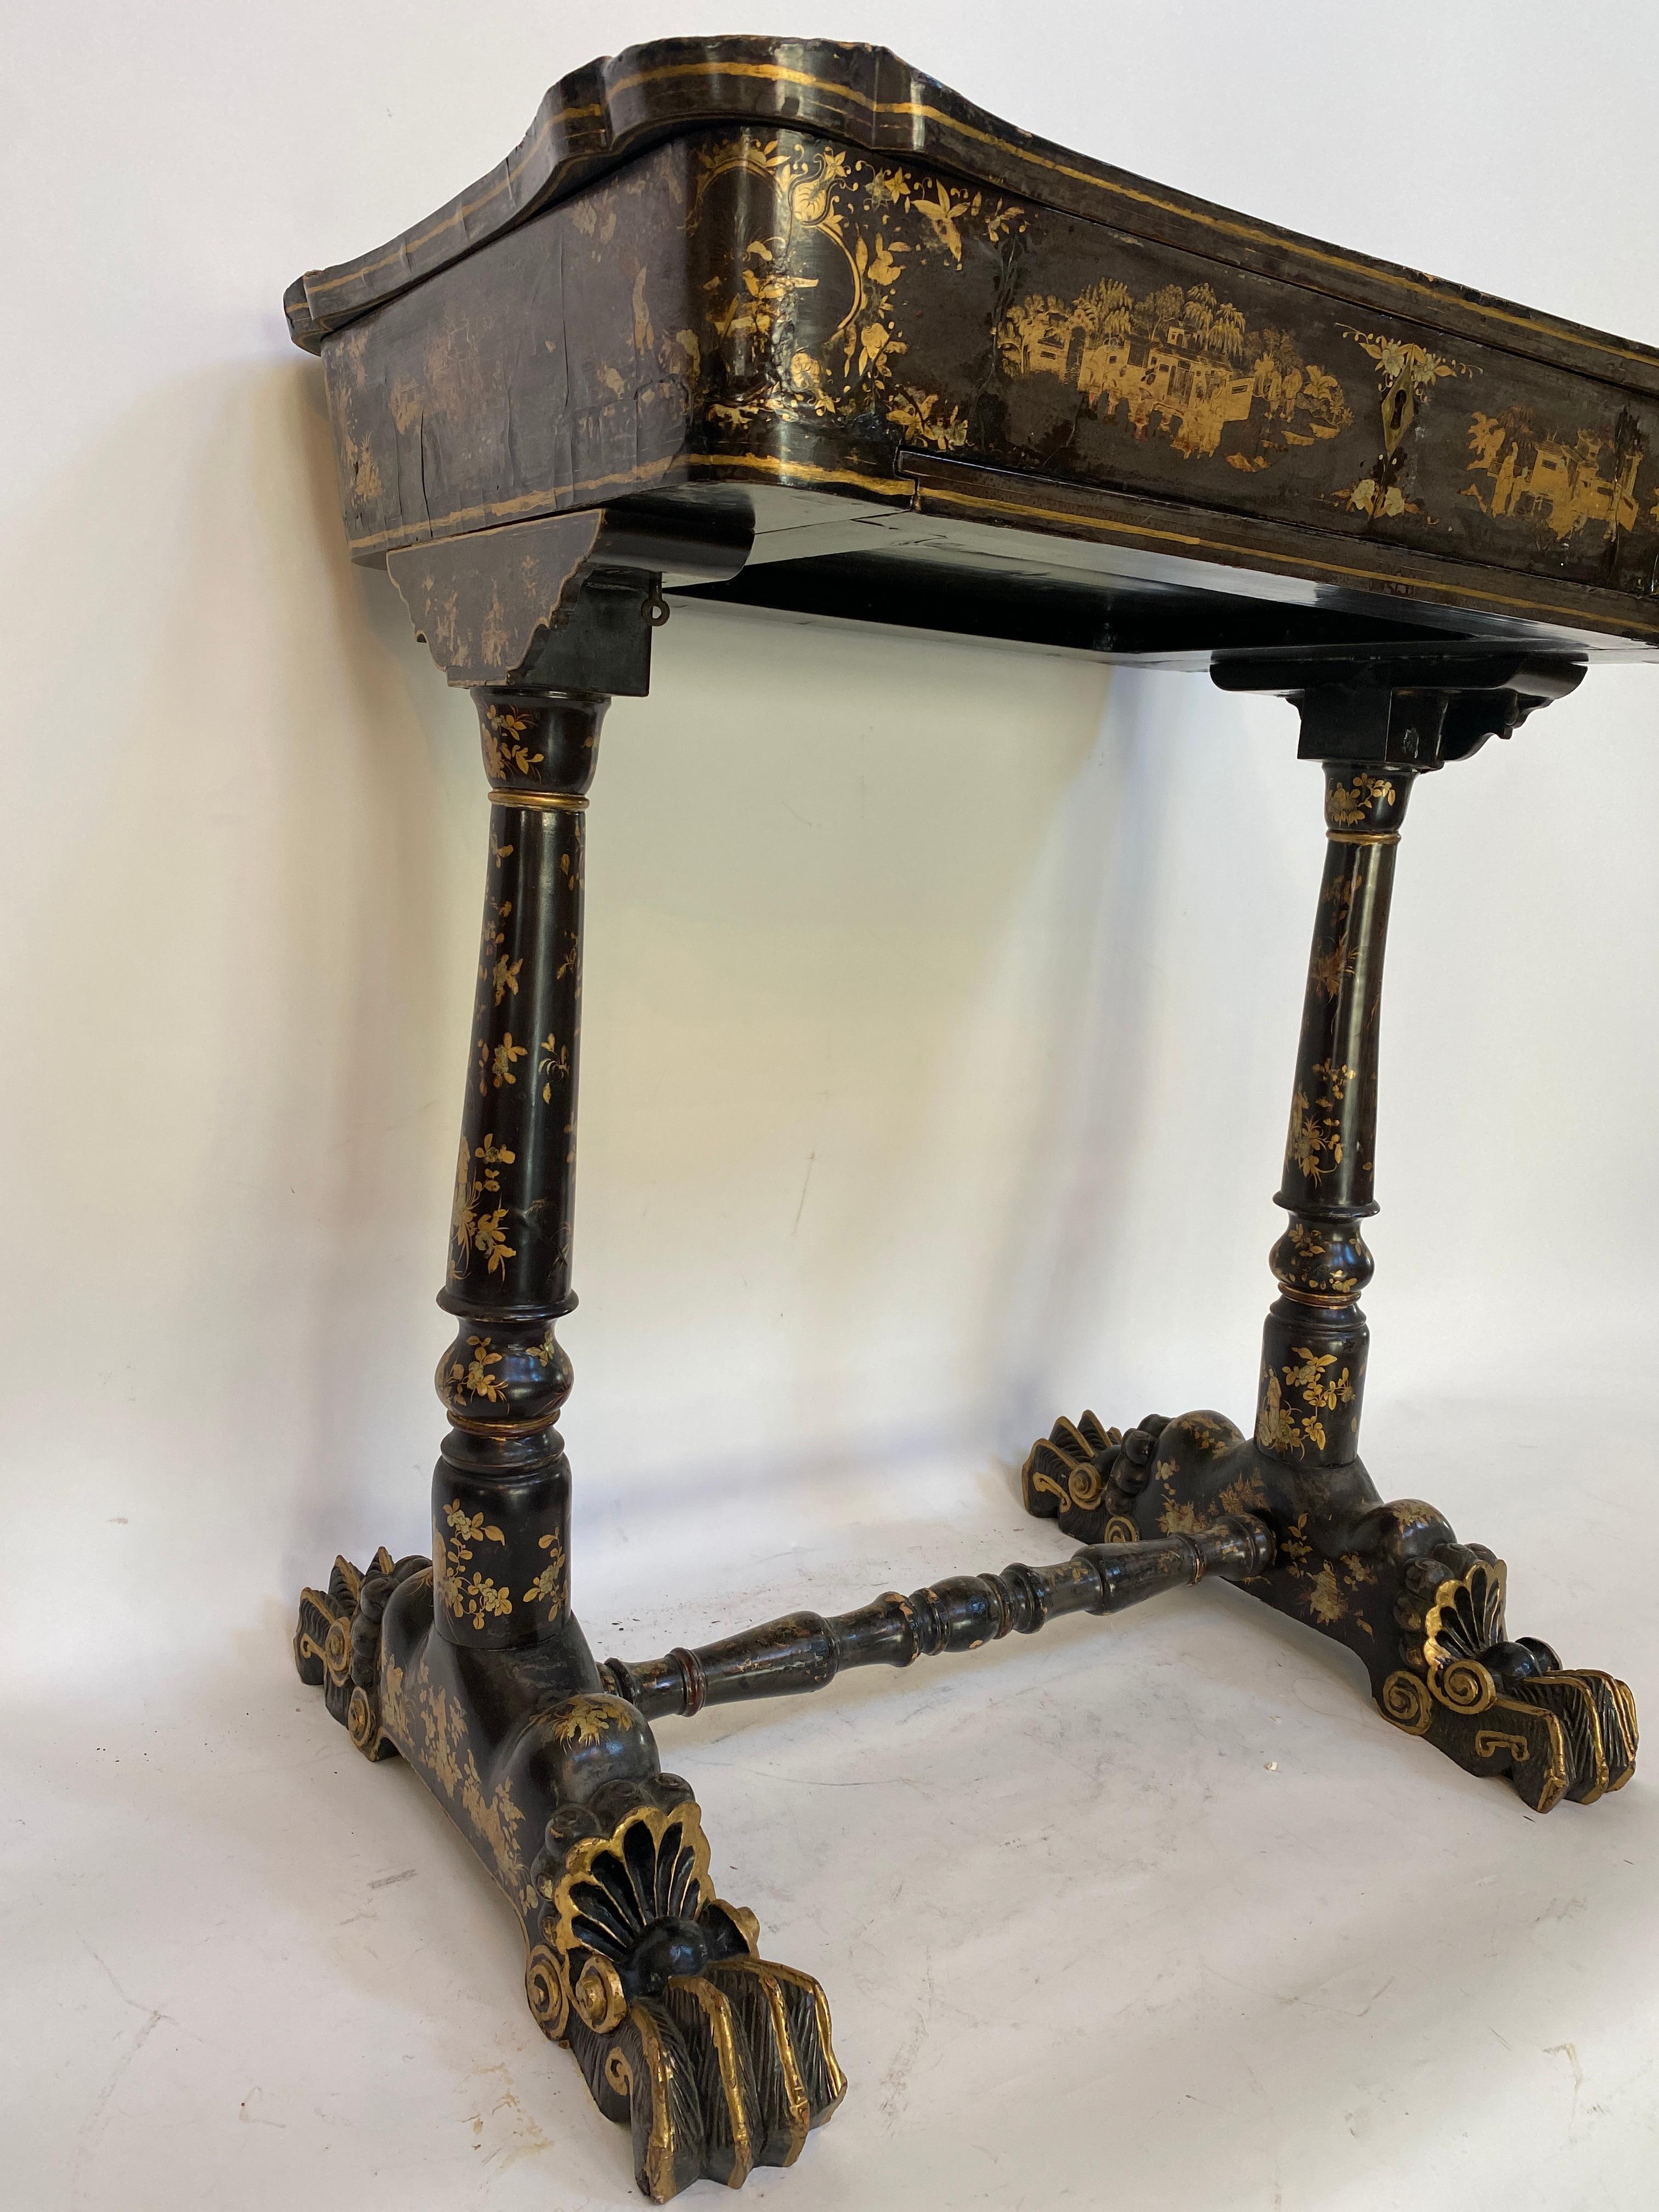 Lacquered Early 19th Century Chinese Export Lacquer and Gilt Sew Working Table For Sale